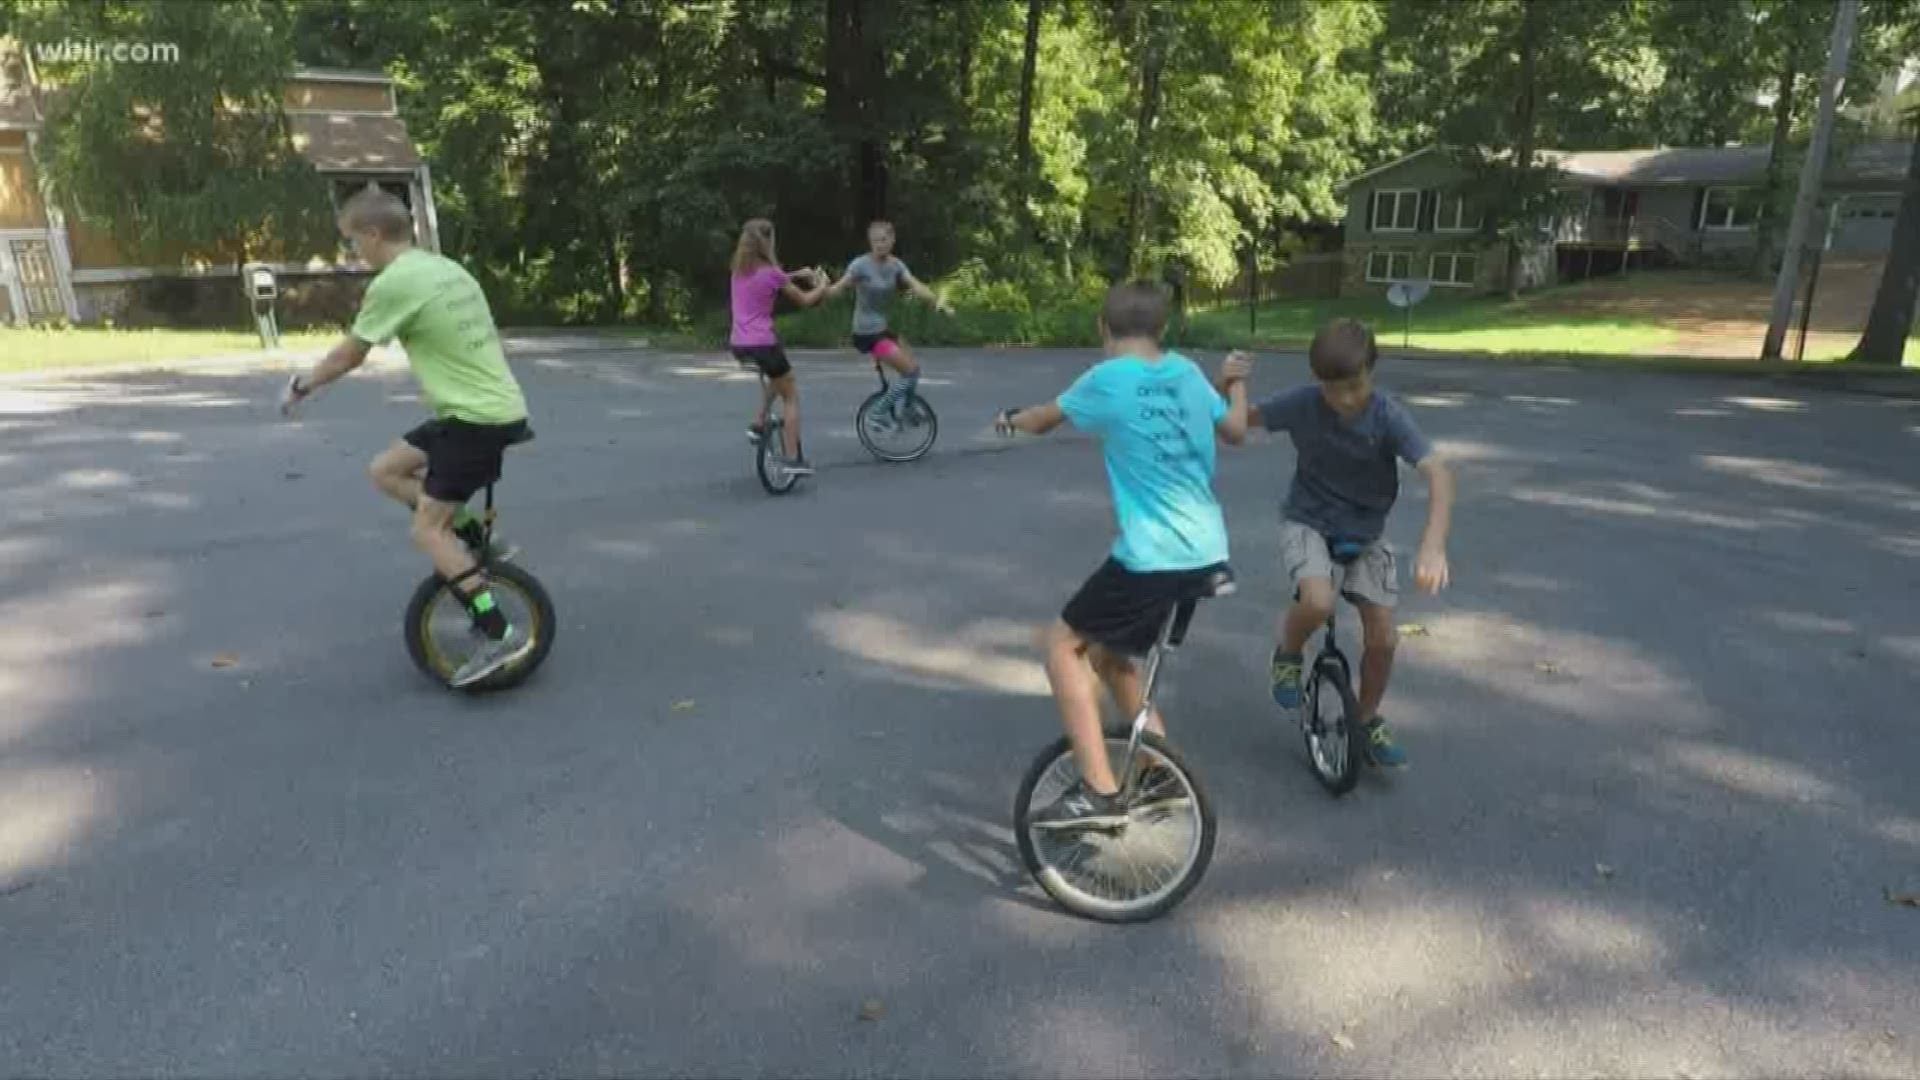 Their matching t-shirts embrace the motto of the unicycling family: one way, one truth, one life, one wheel